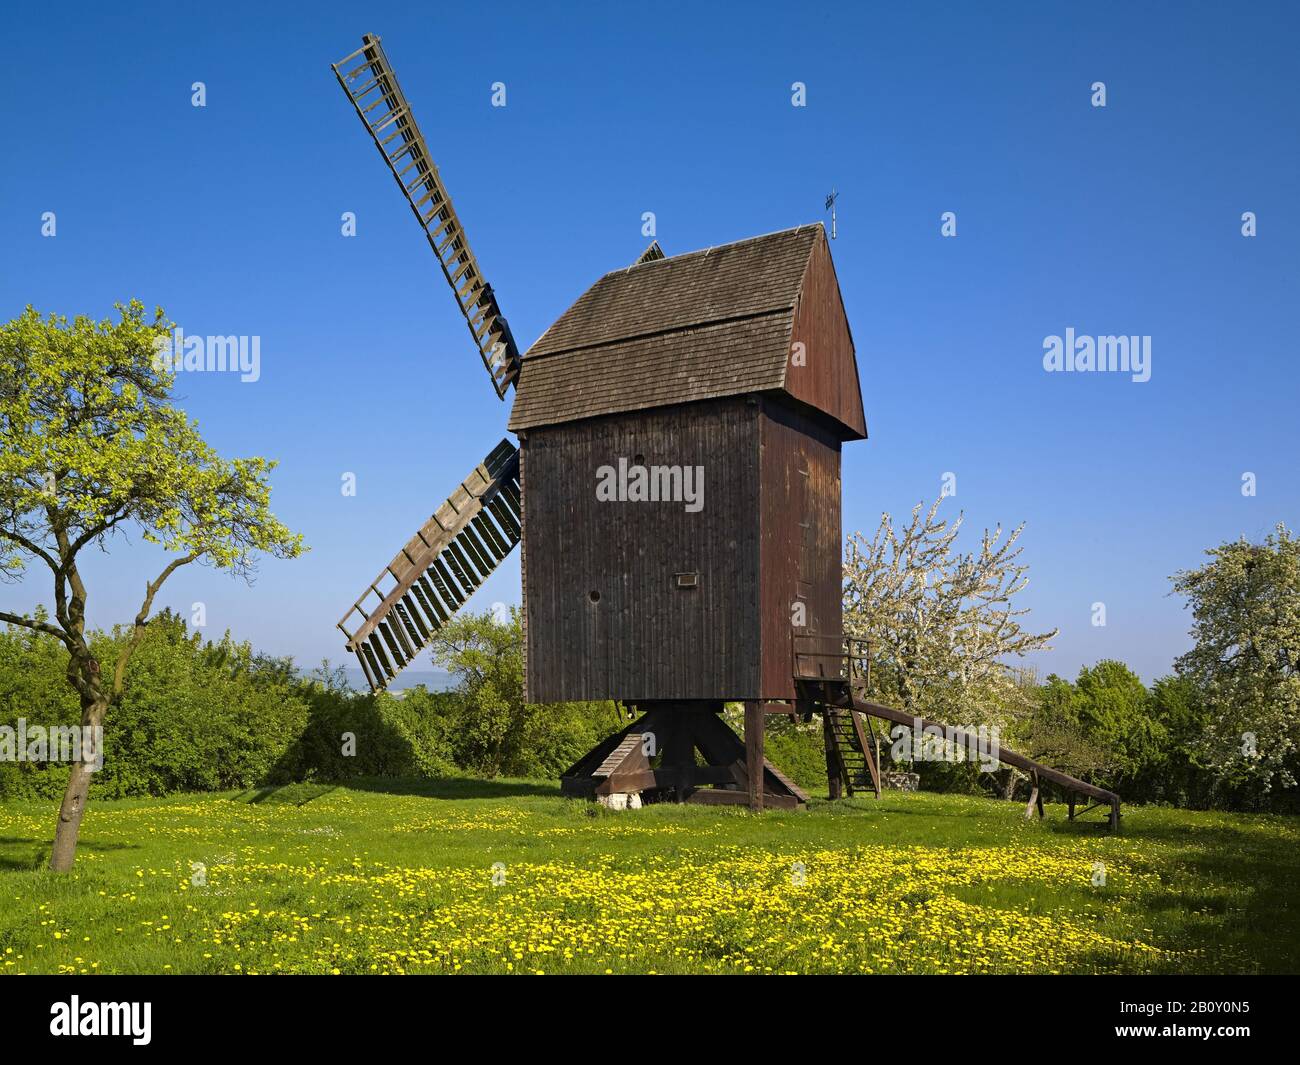 Bock windmill in Schillingstedt, Thuringia, Germany, Stock Photo